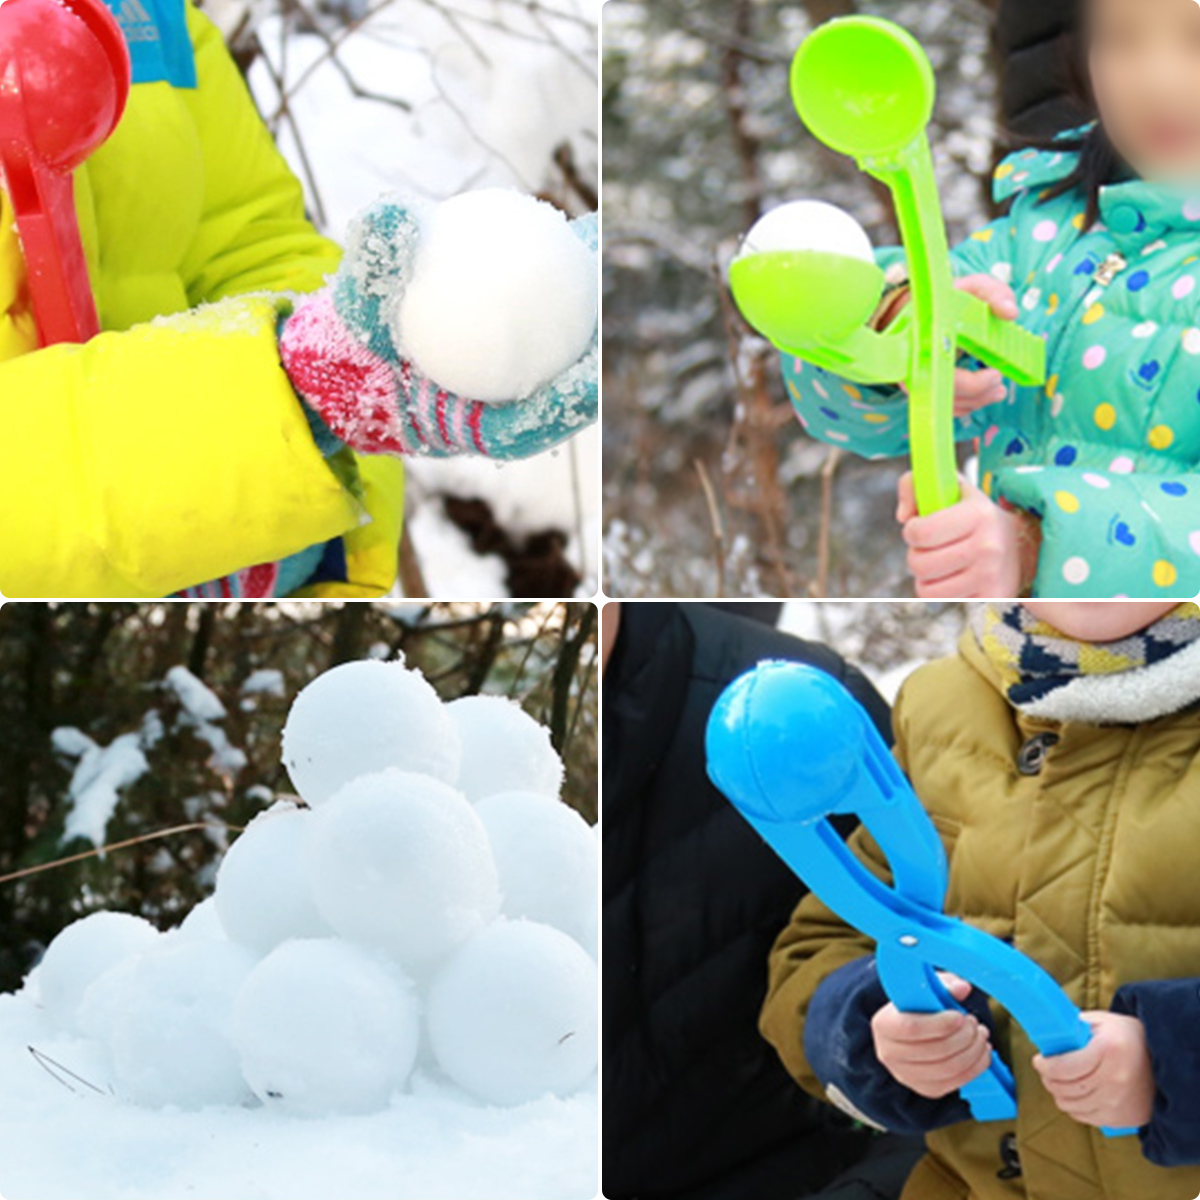 4-Pcs-Winter-Snow-Balls-Maker-Child-Snowballs-Scoop-Family-Time-Kids-Adult-Gift-Toys-Outdoor-Skating-1892042-10